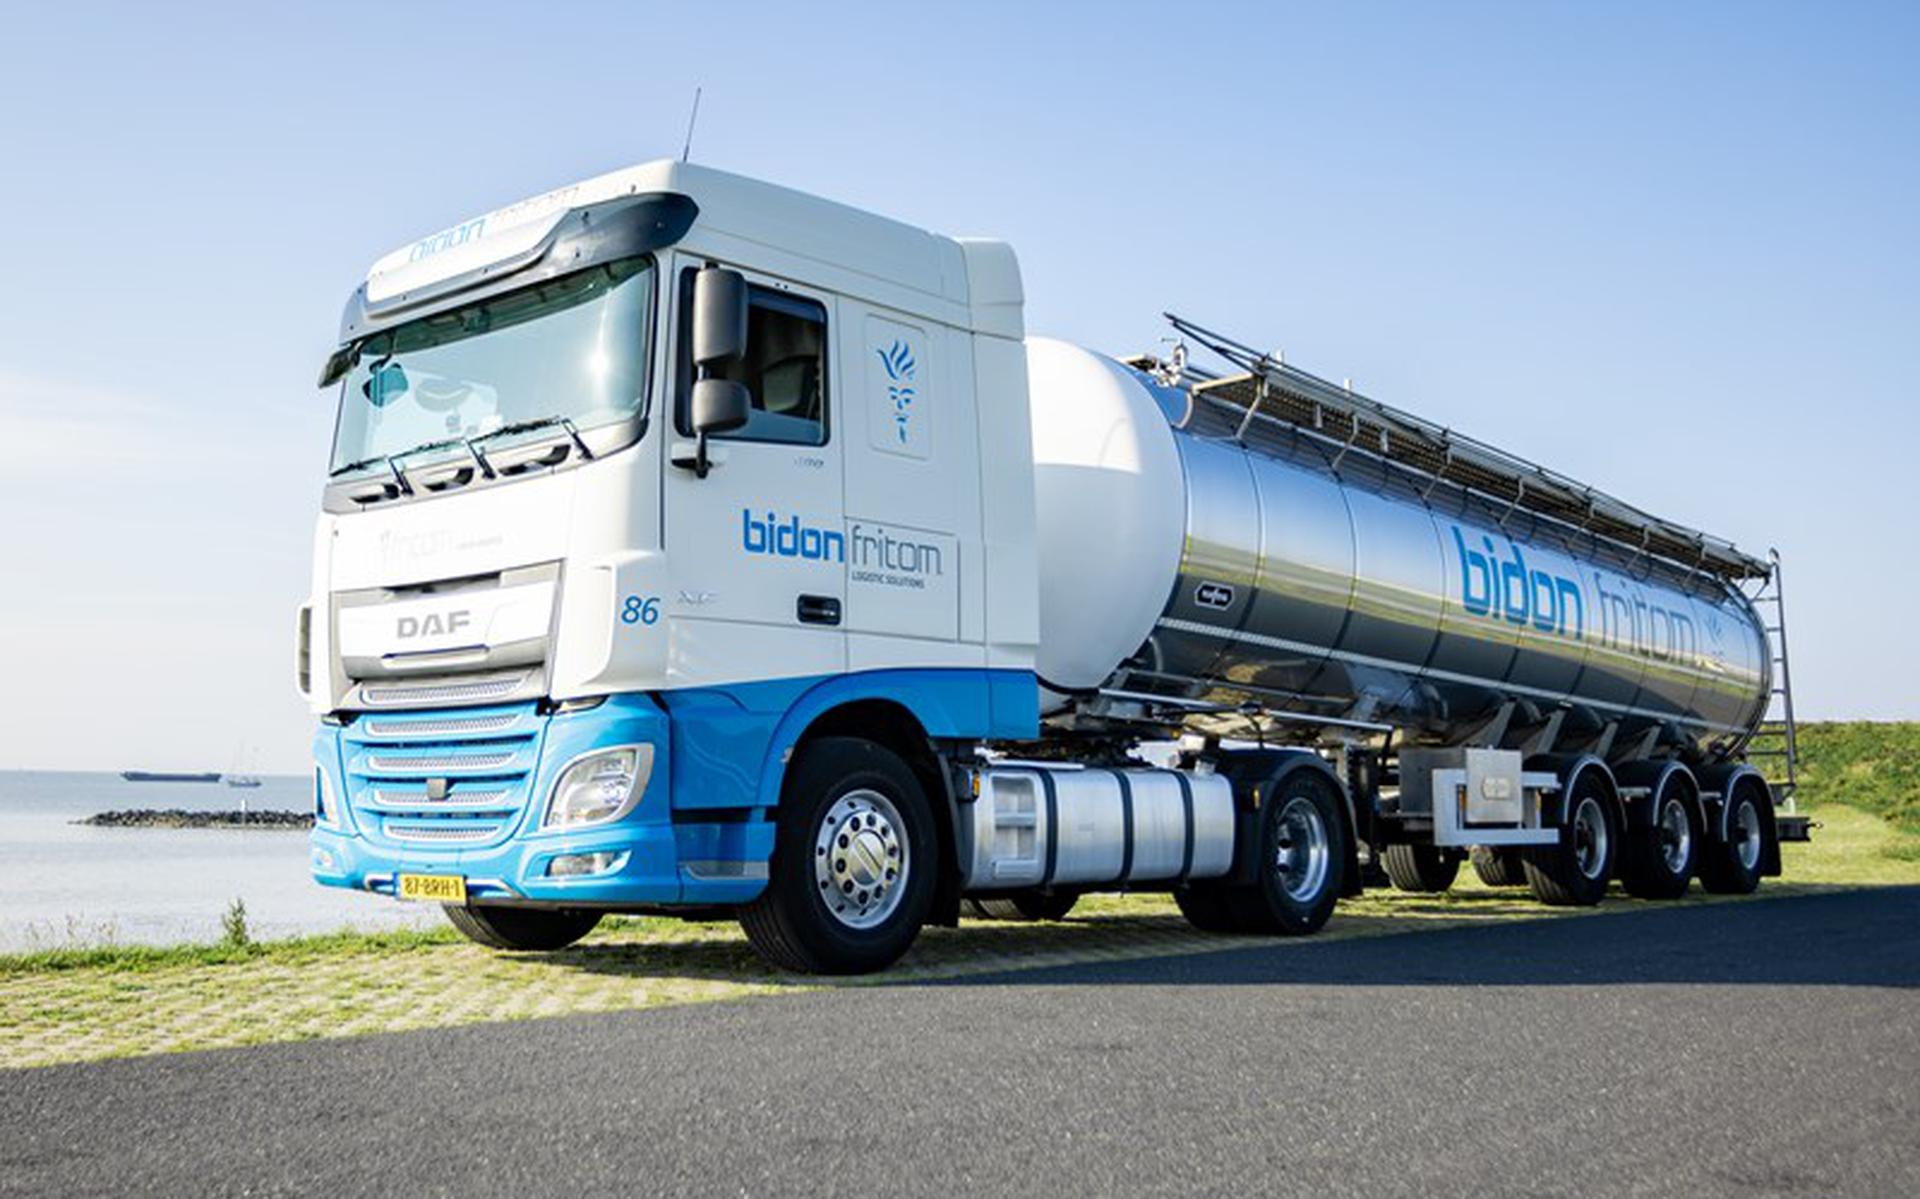 Schenk Tanktransport acquires 65 tankers and 32 drivers from chocolate transport company Bidon|Fritom from Bolsward